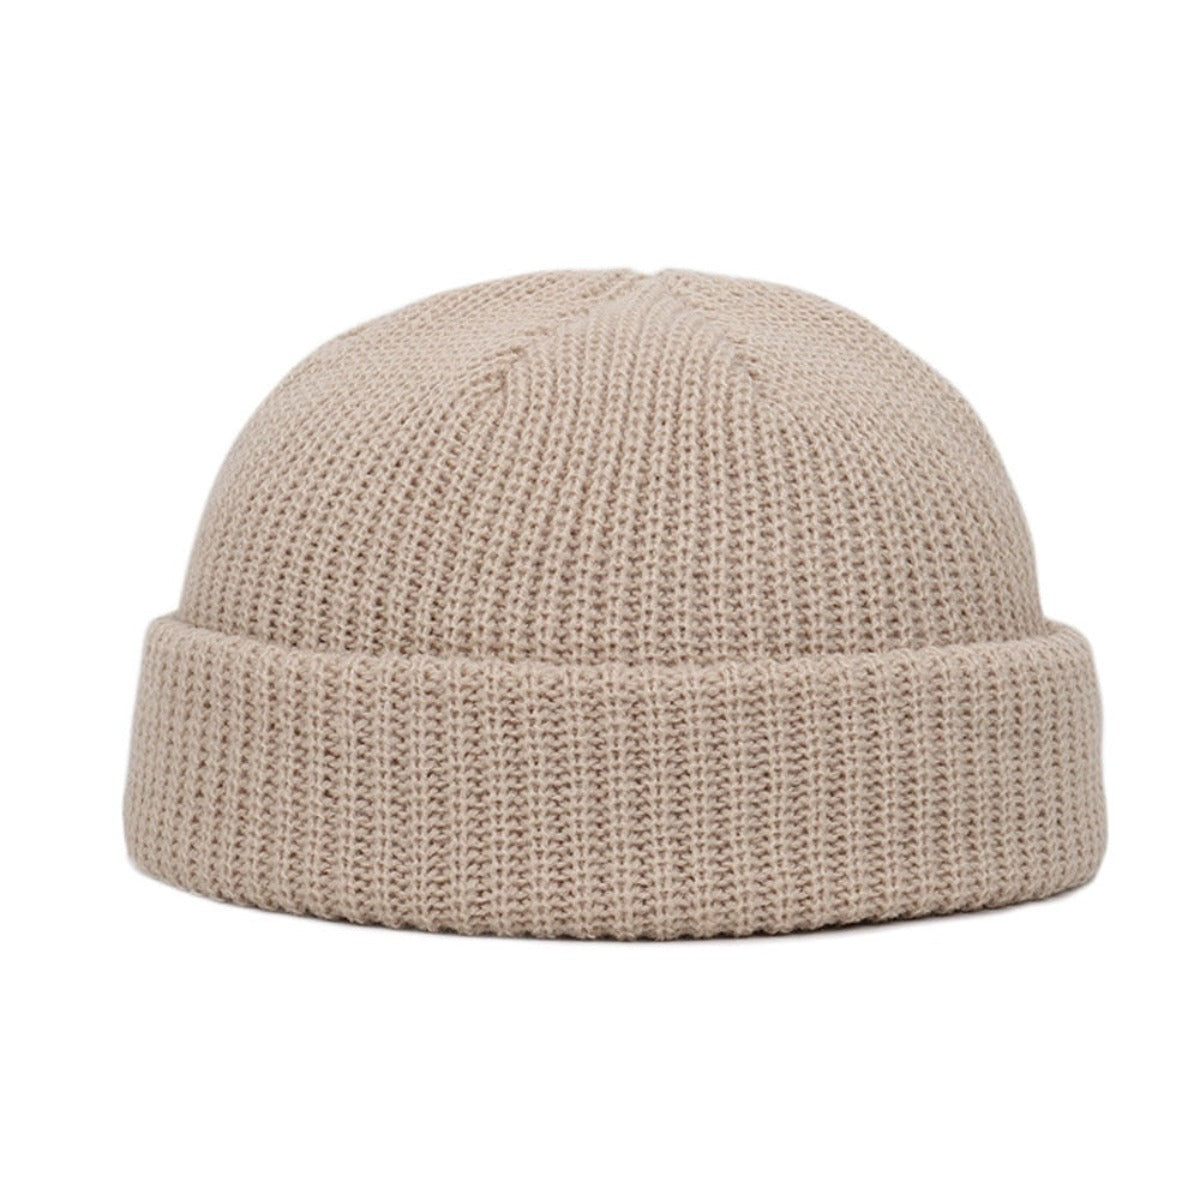 A Wool Knitted Skull Cap Beanie in beige, made of a knit fabric, on a white background.